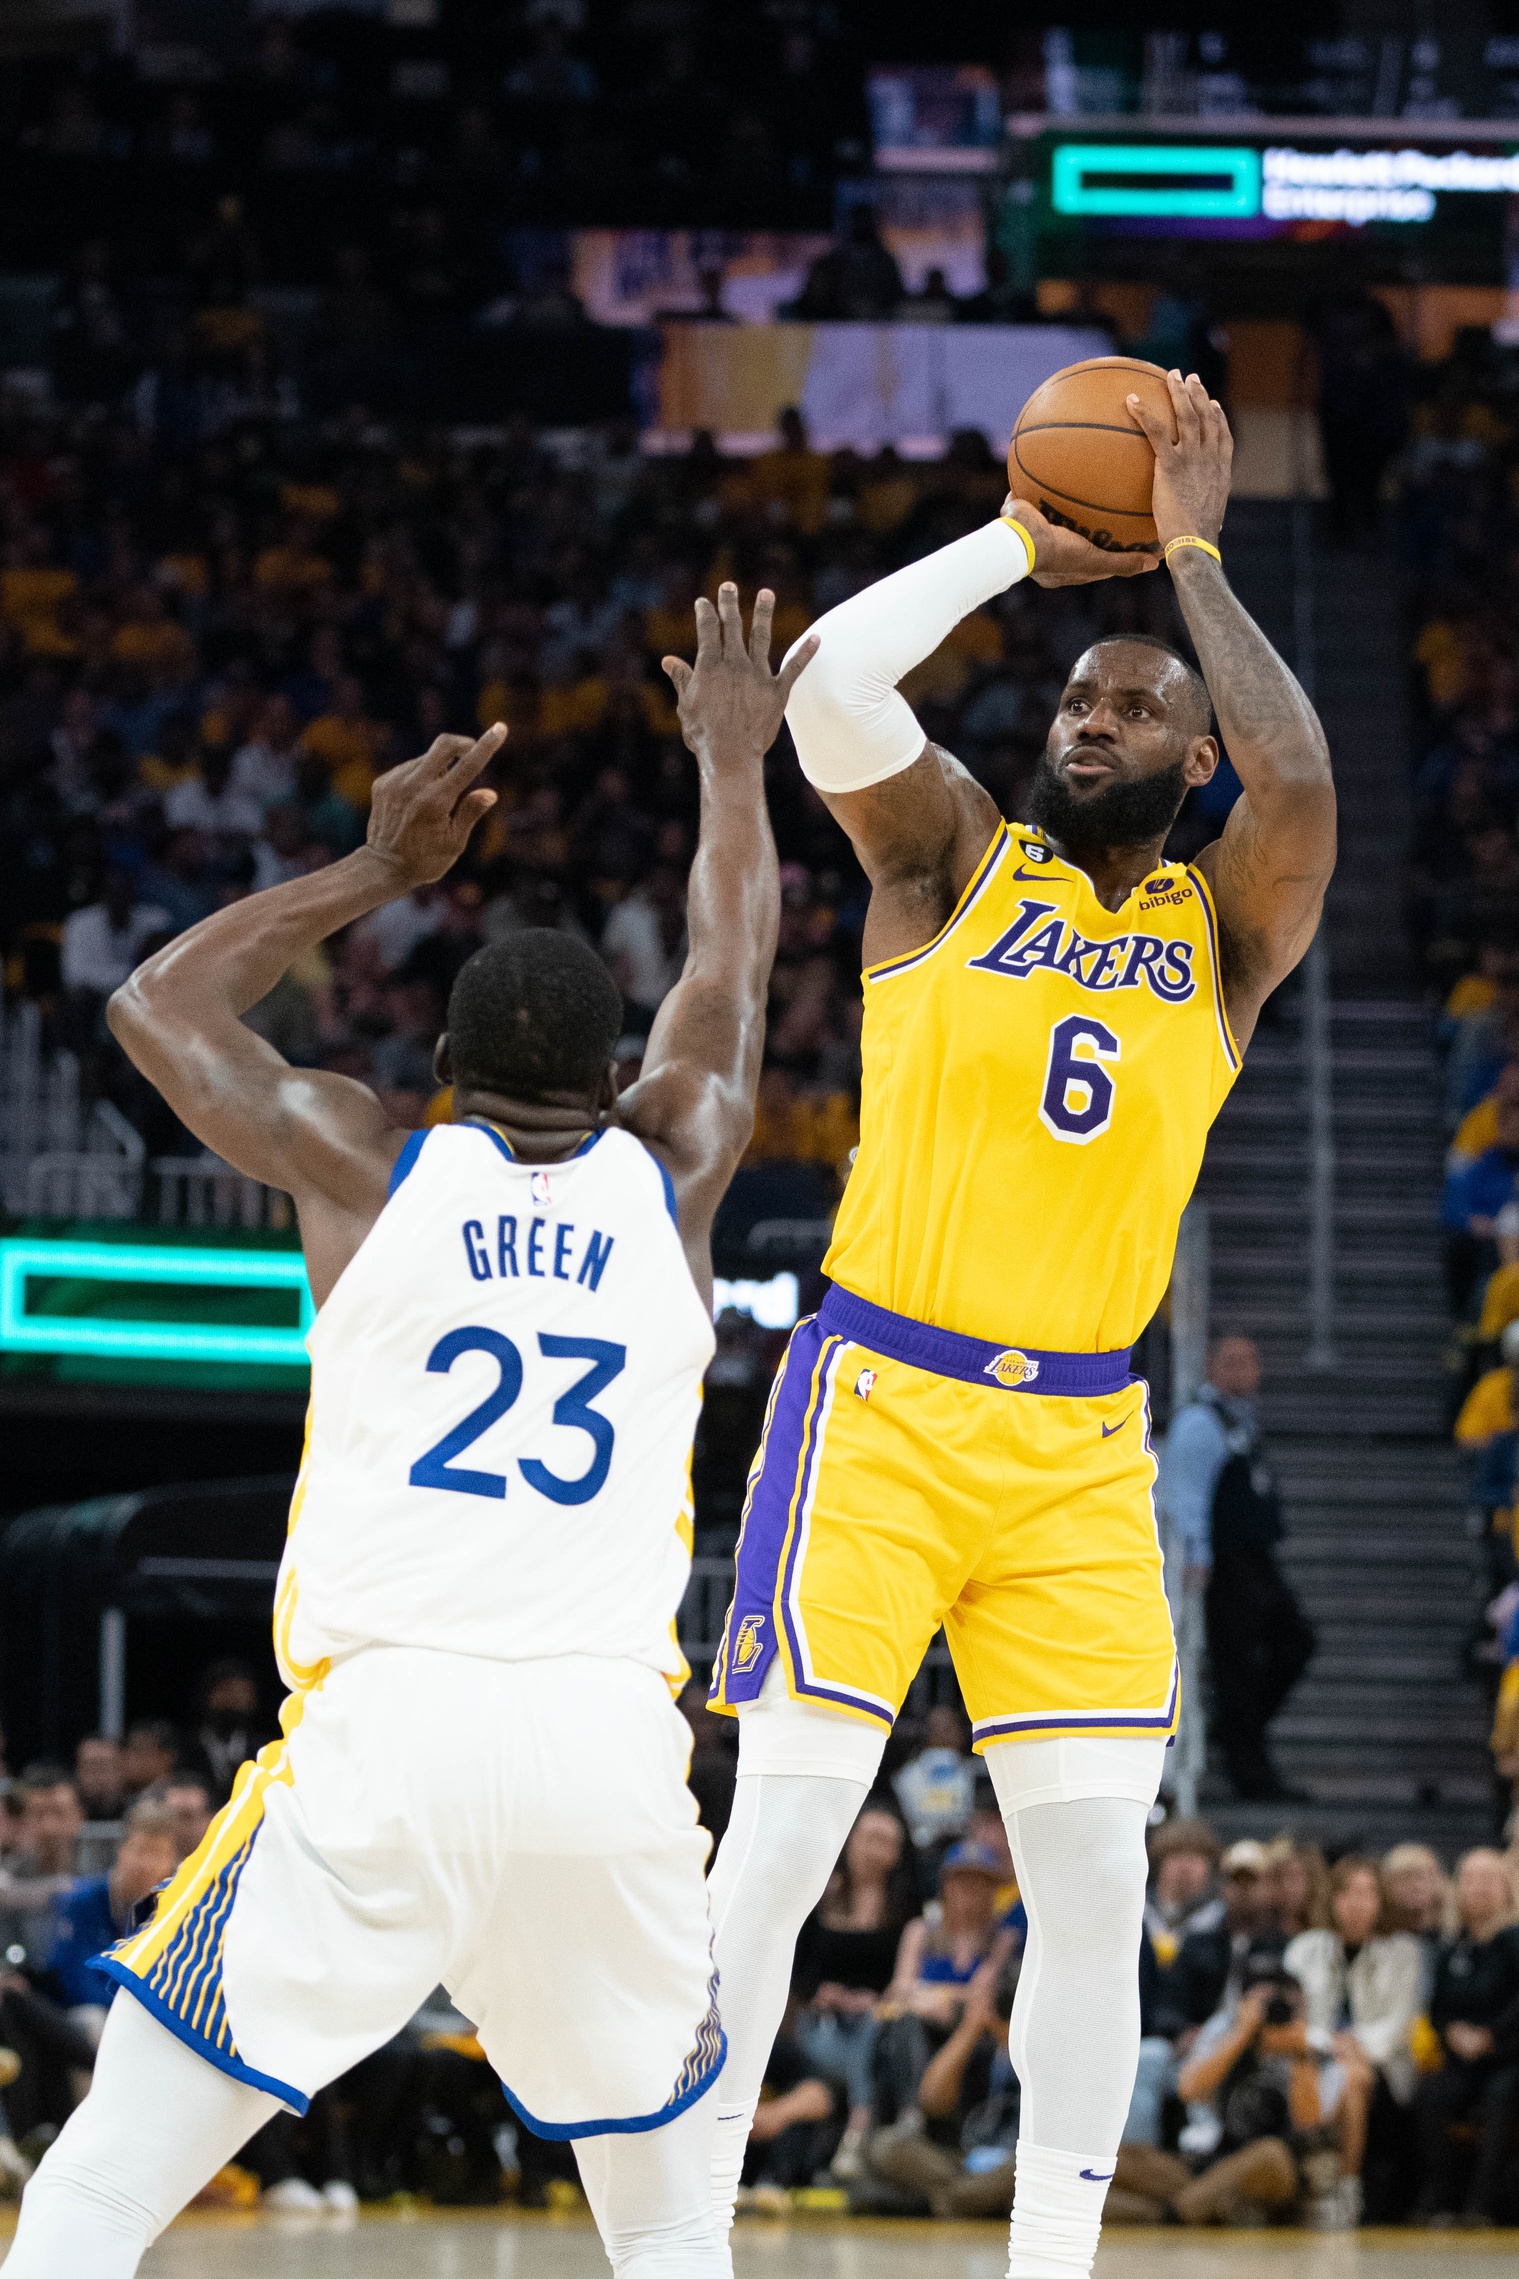 Draymond Green may leave the Warriors for the Los Angeles Lakers